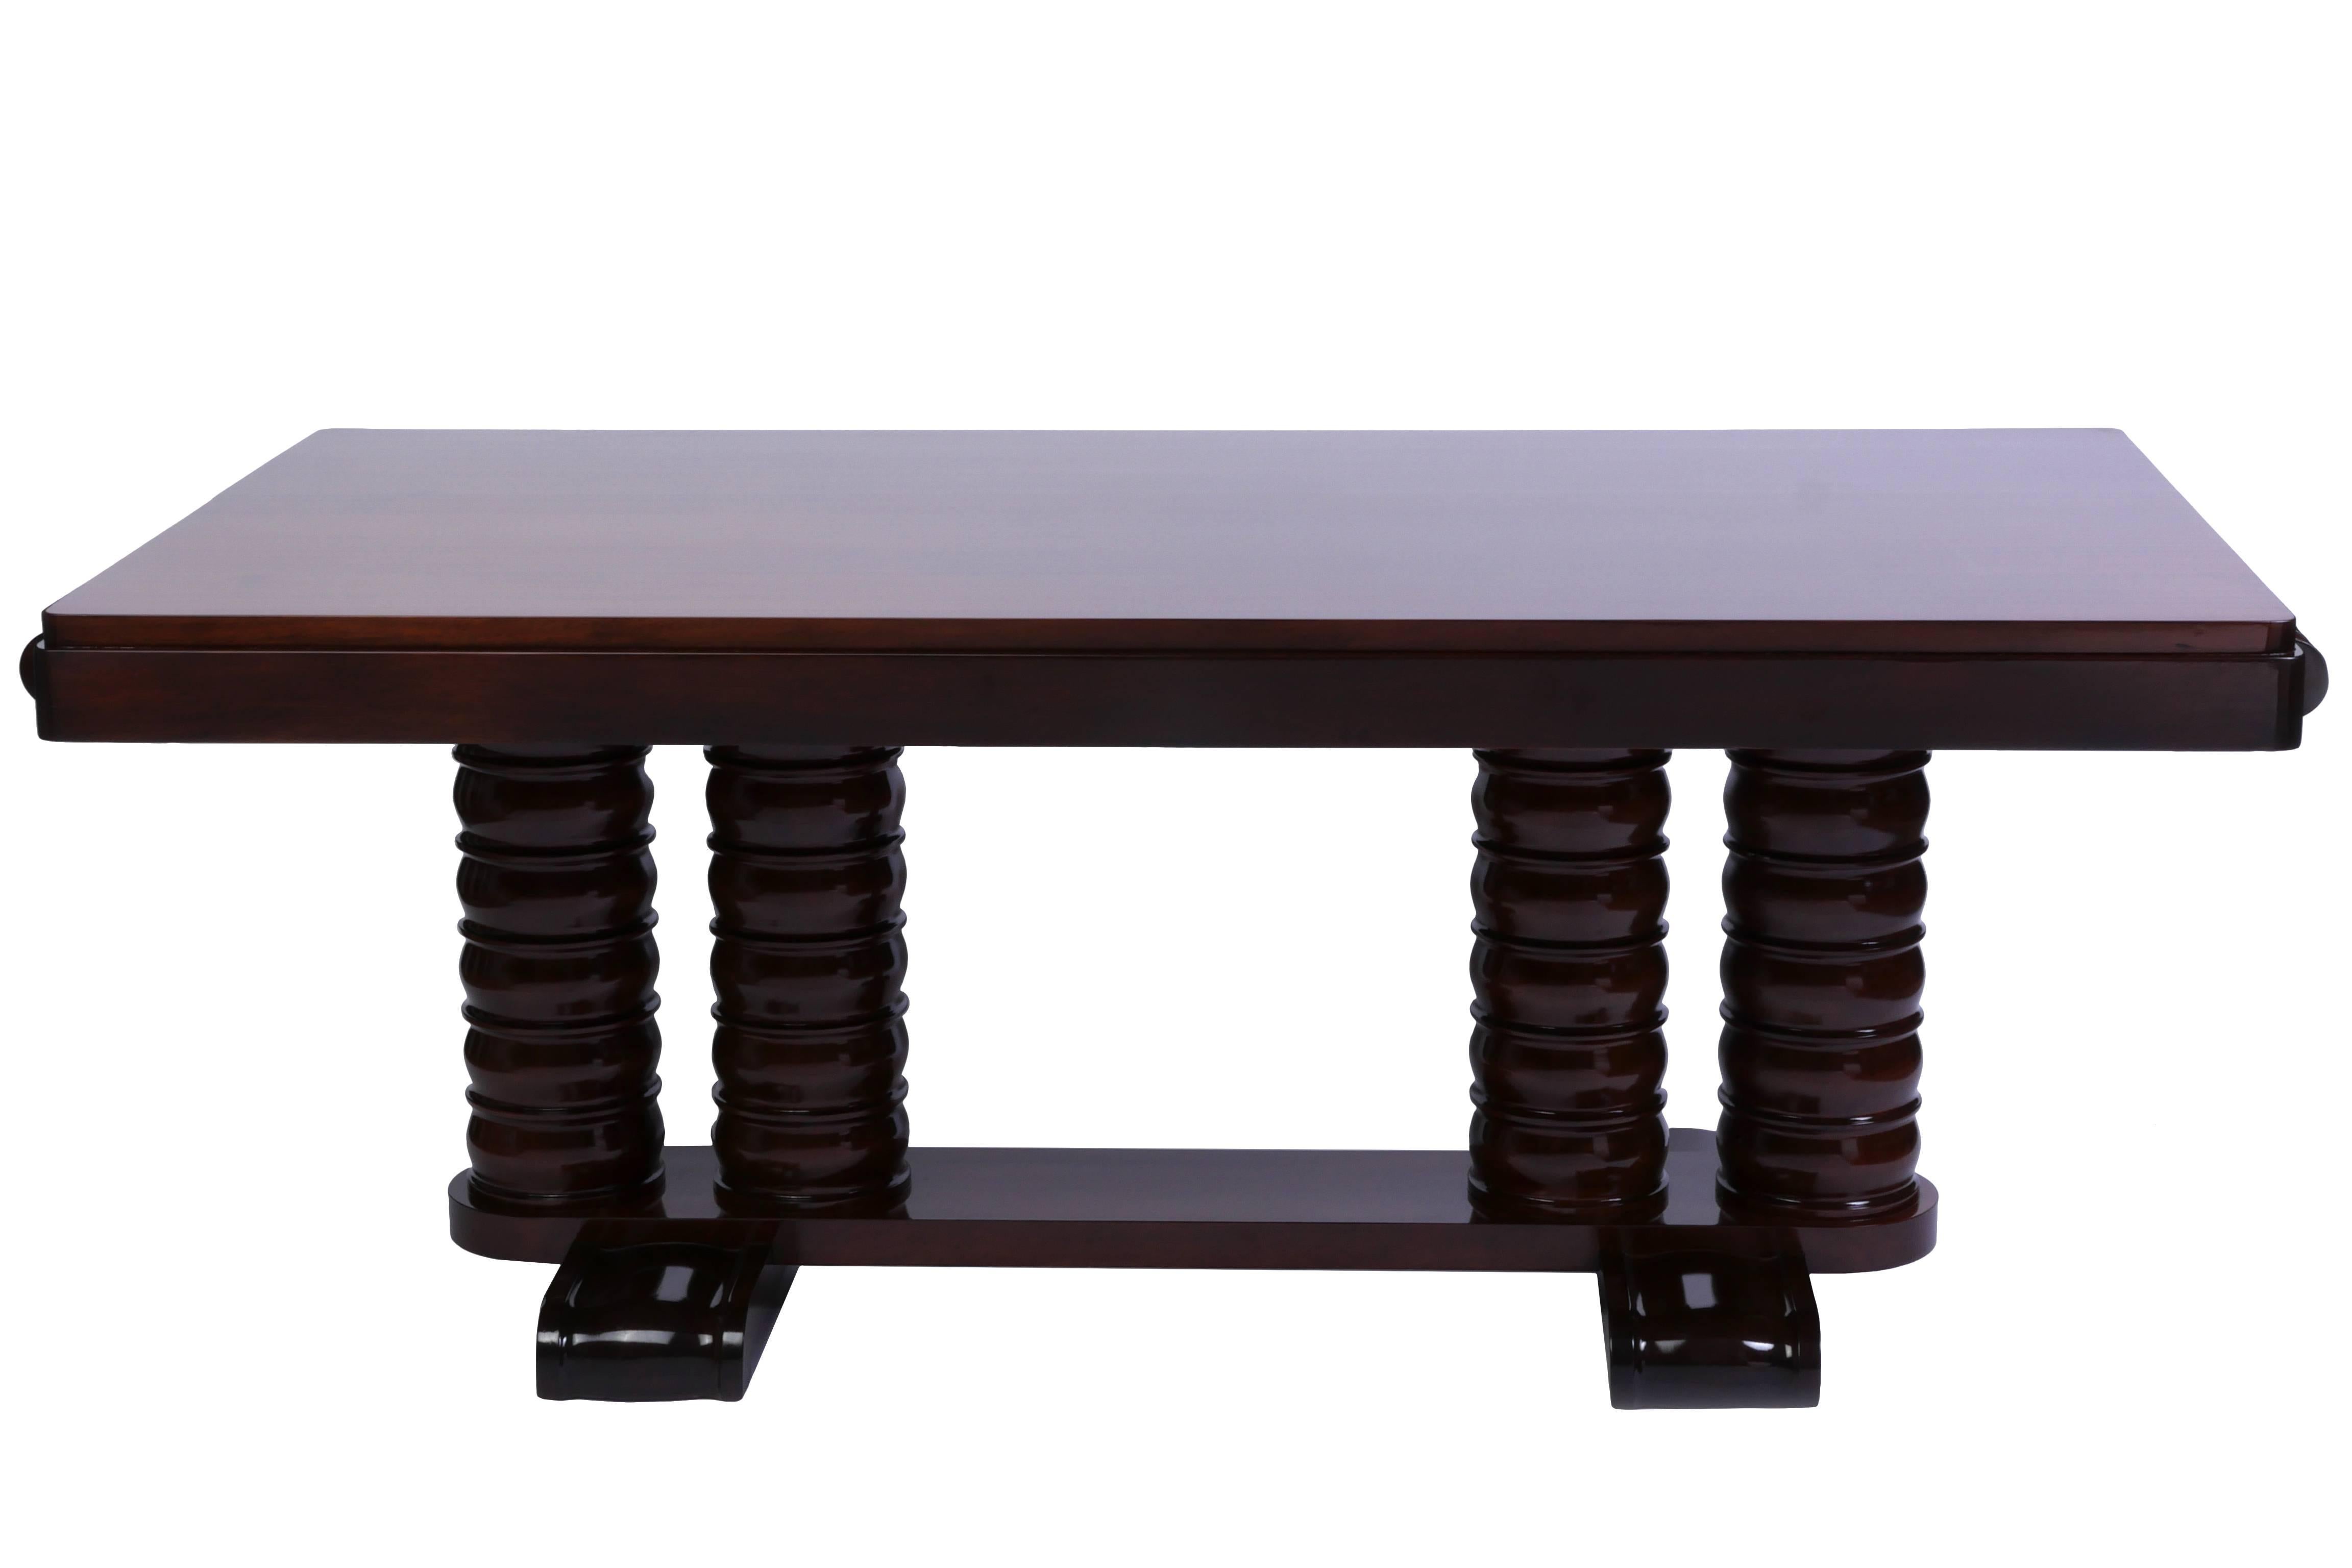 This exceptional 1940s French Art Deco solid mahogany dining table was designed and executed by Gaston Poisson and features exquisite straight lines and clean carved curve details on the legs, feet and extension rail ends. This table is a fantastic